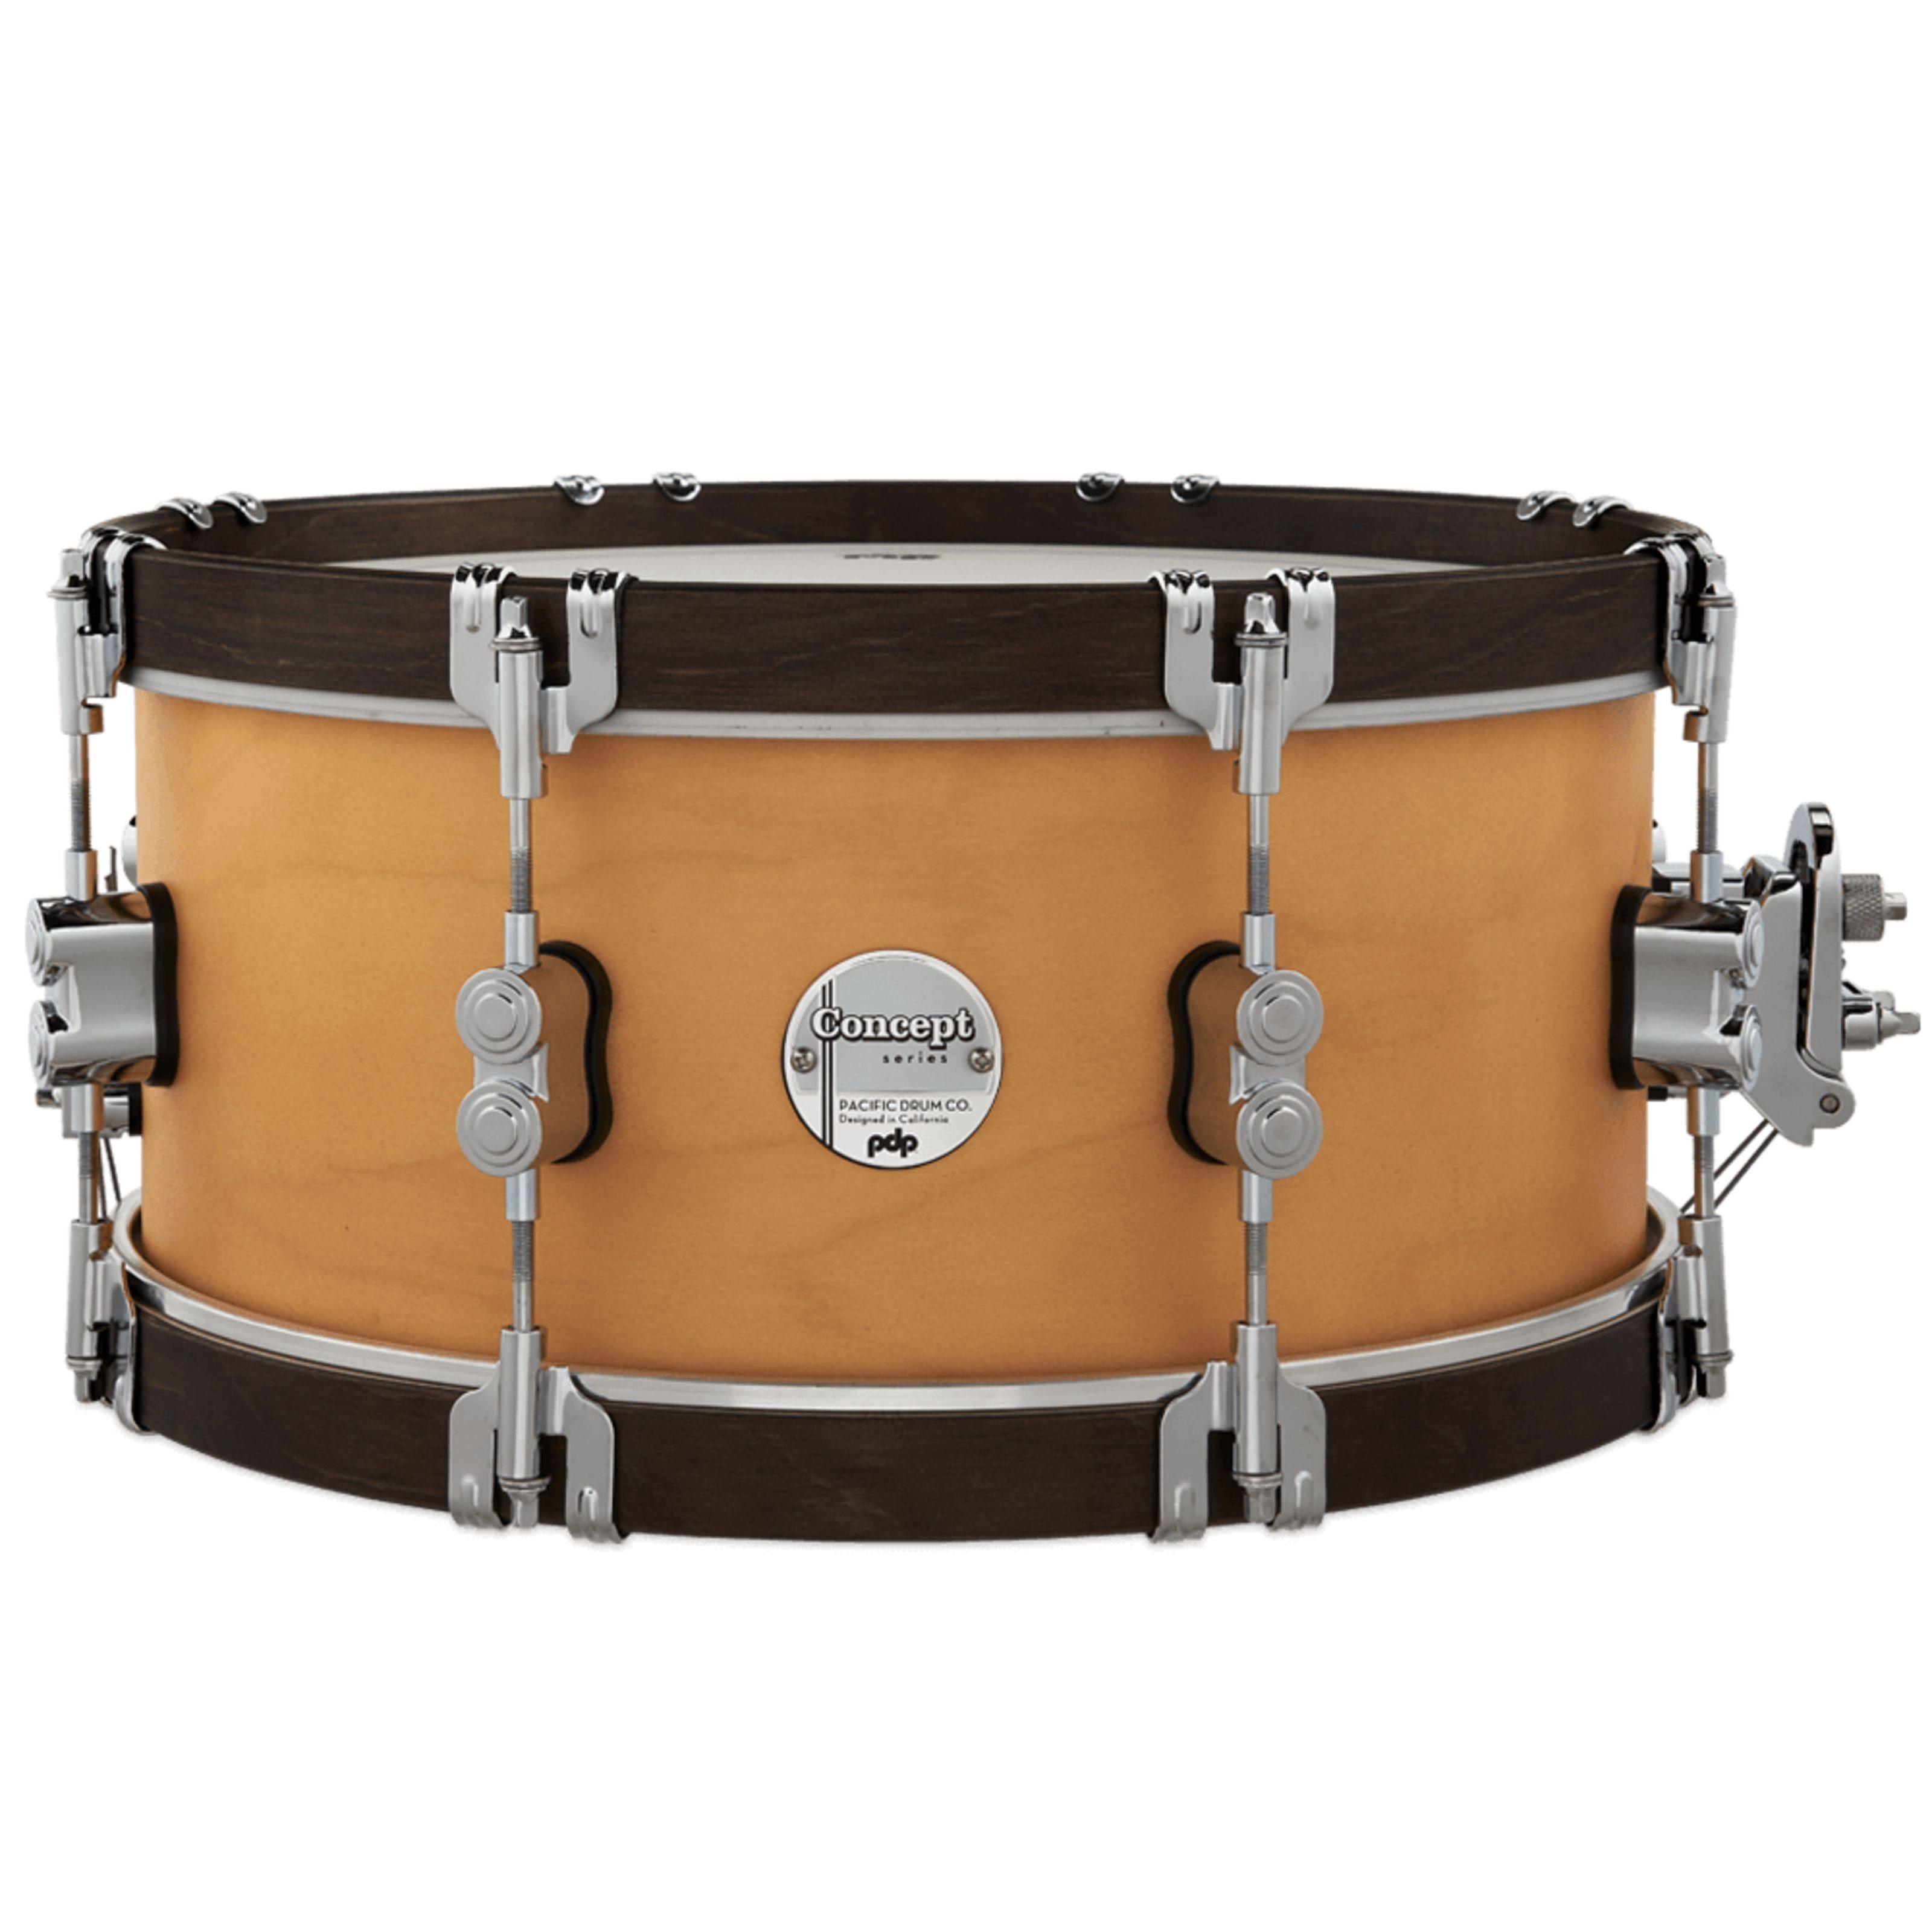 pdp Snare Drum,Concept Classic Snare 14"x6,5" Natural / Walnut Hoops, Schlagzeuge, Snare Drums, Concept Classic Snare 14"x6,5" Natural / Walnut Hoops - Snare Drum